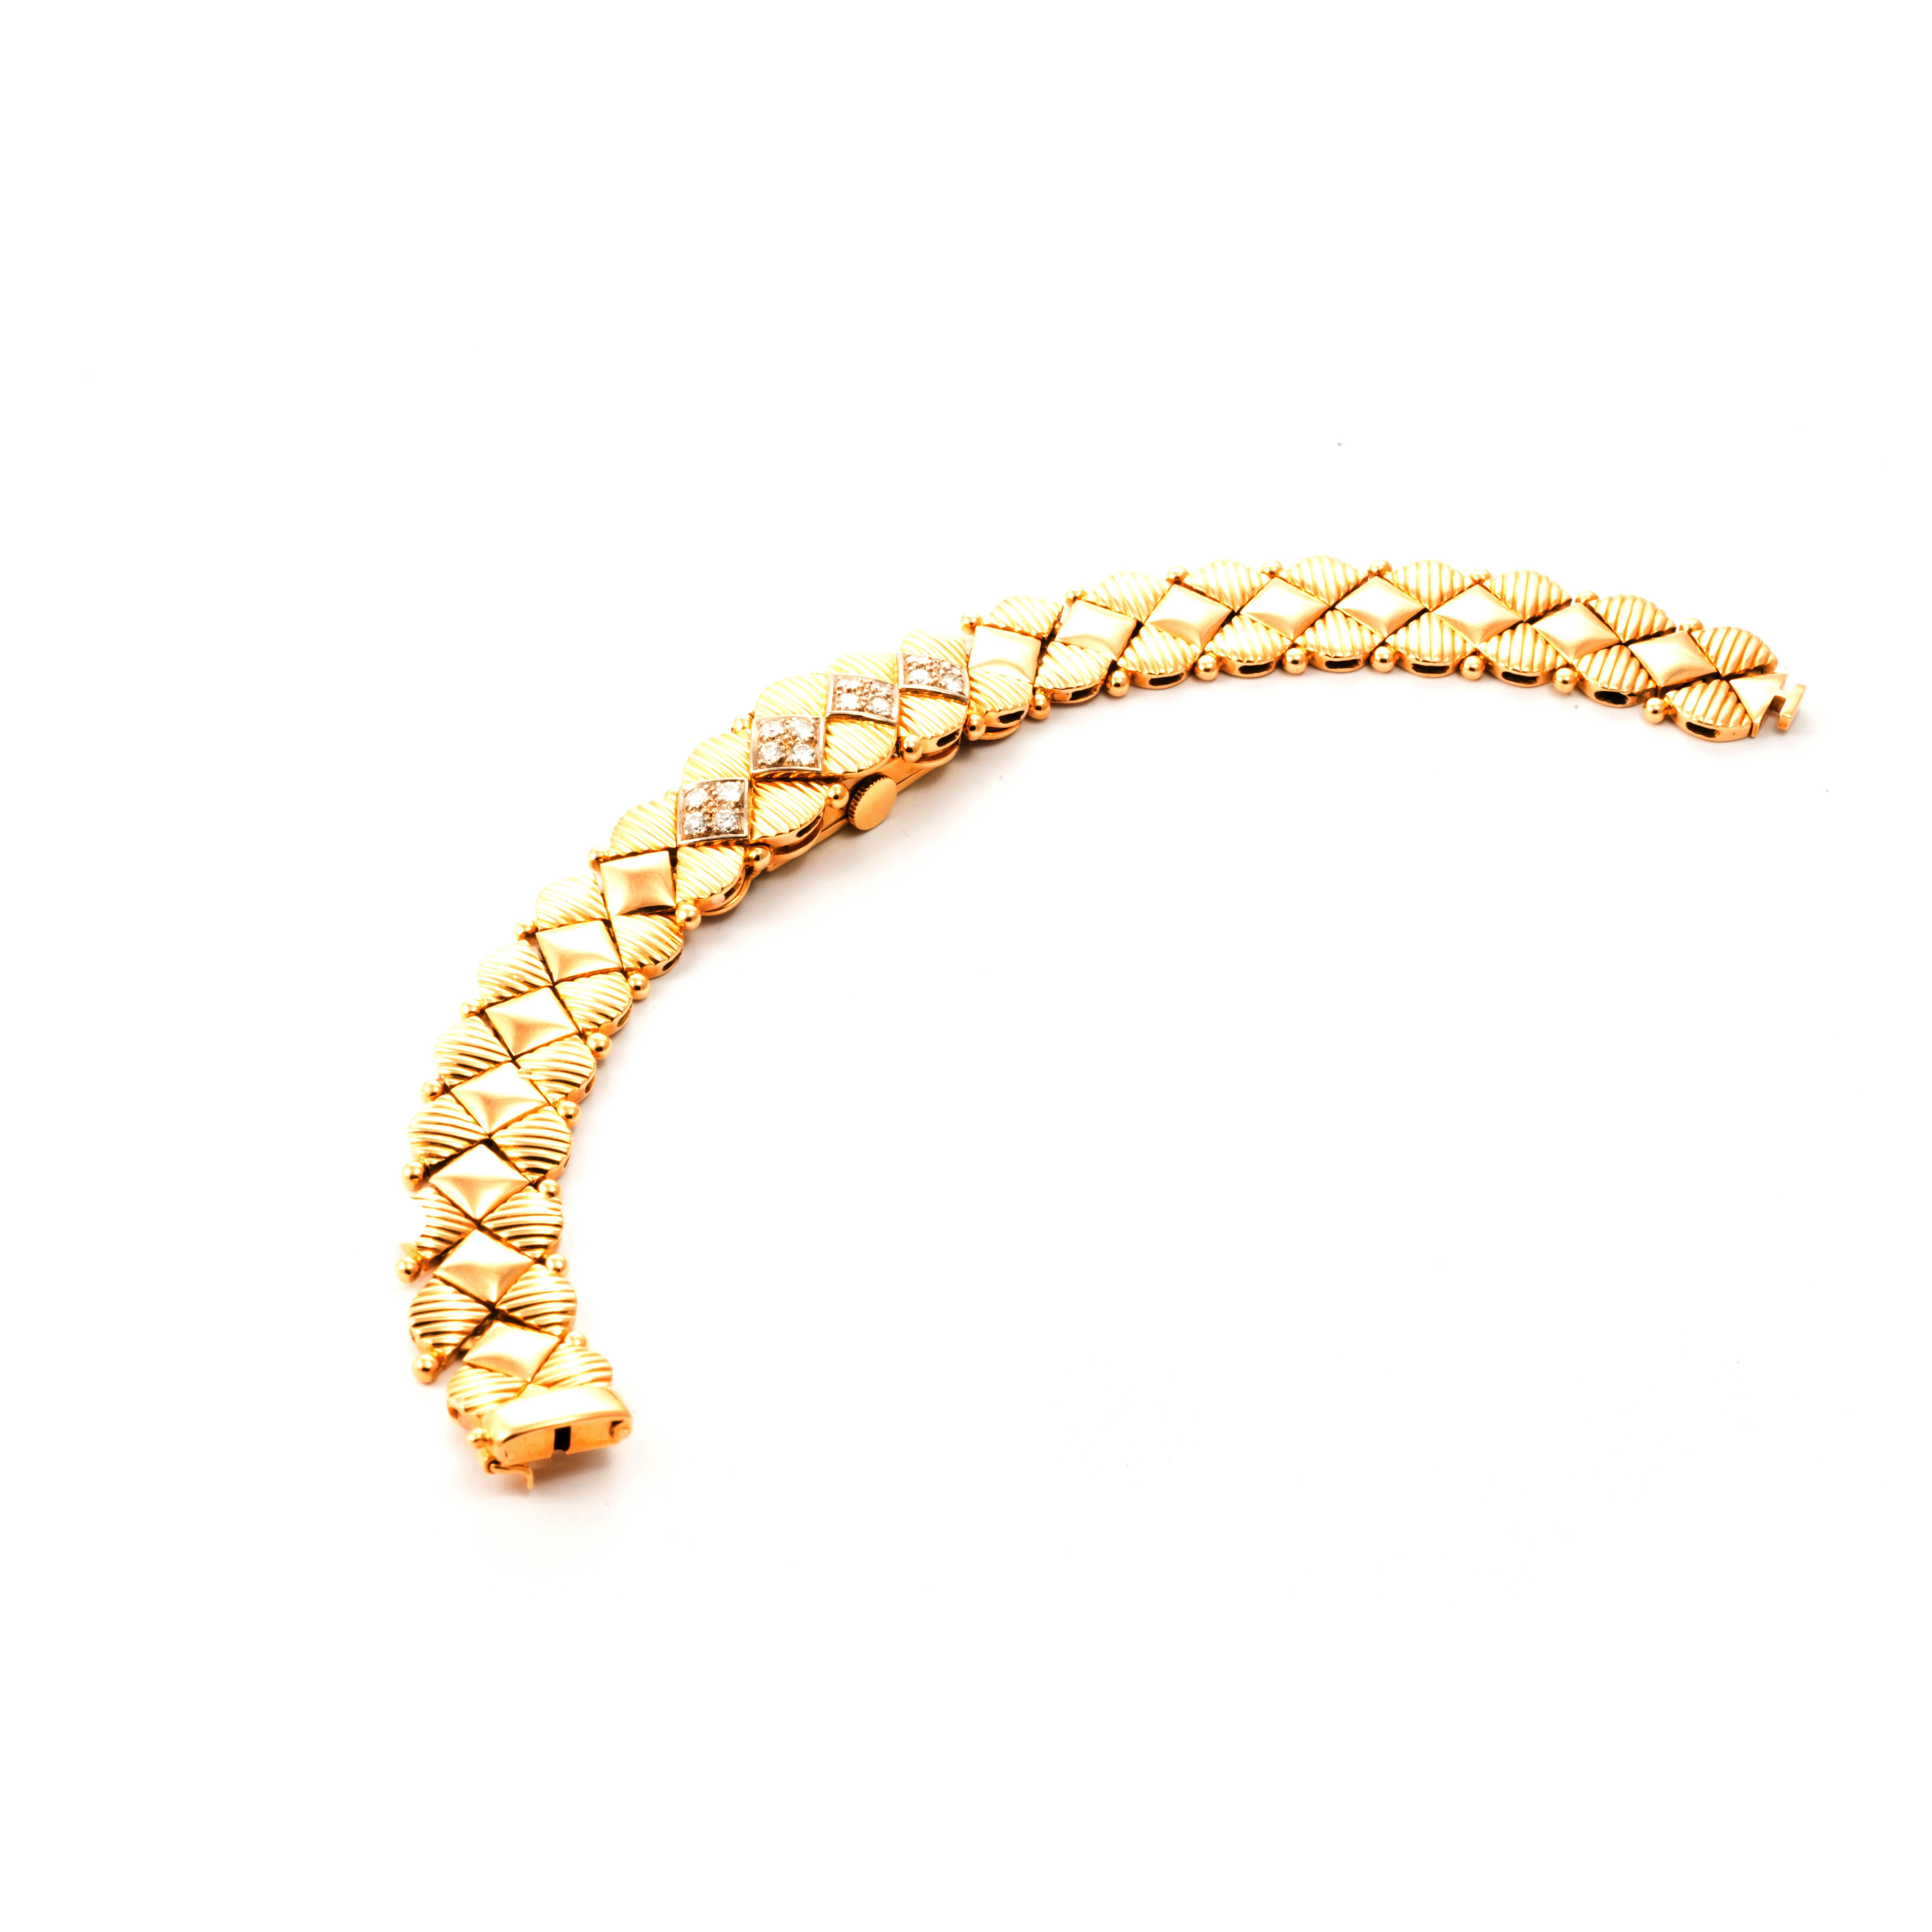 Gubelin diamond and yellow gold 18 Karats concealed watch bracelet with 16 diamonds carats 0.75 approximately.
The bracelet is composed of numerous rhombuses gold links, forming an intriguing pattern. The centre section opens to reveal a hidden